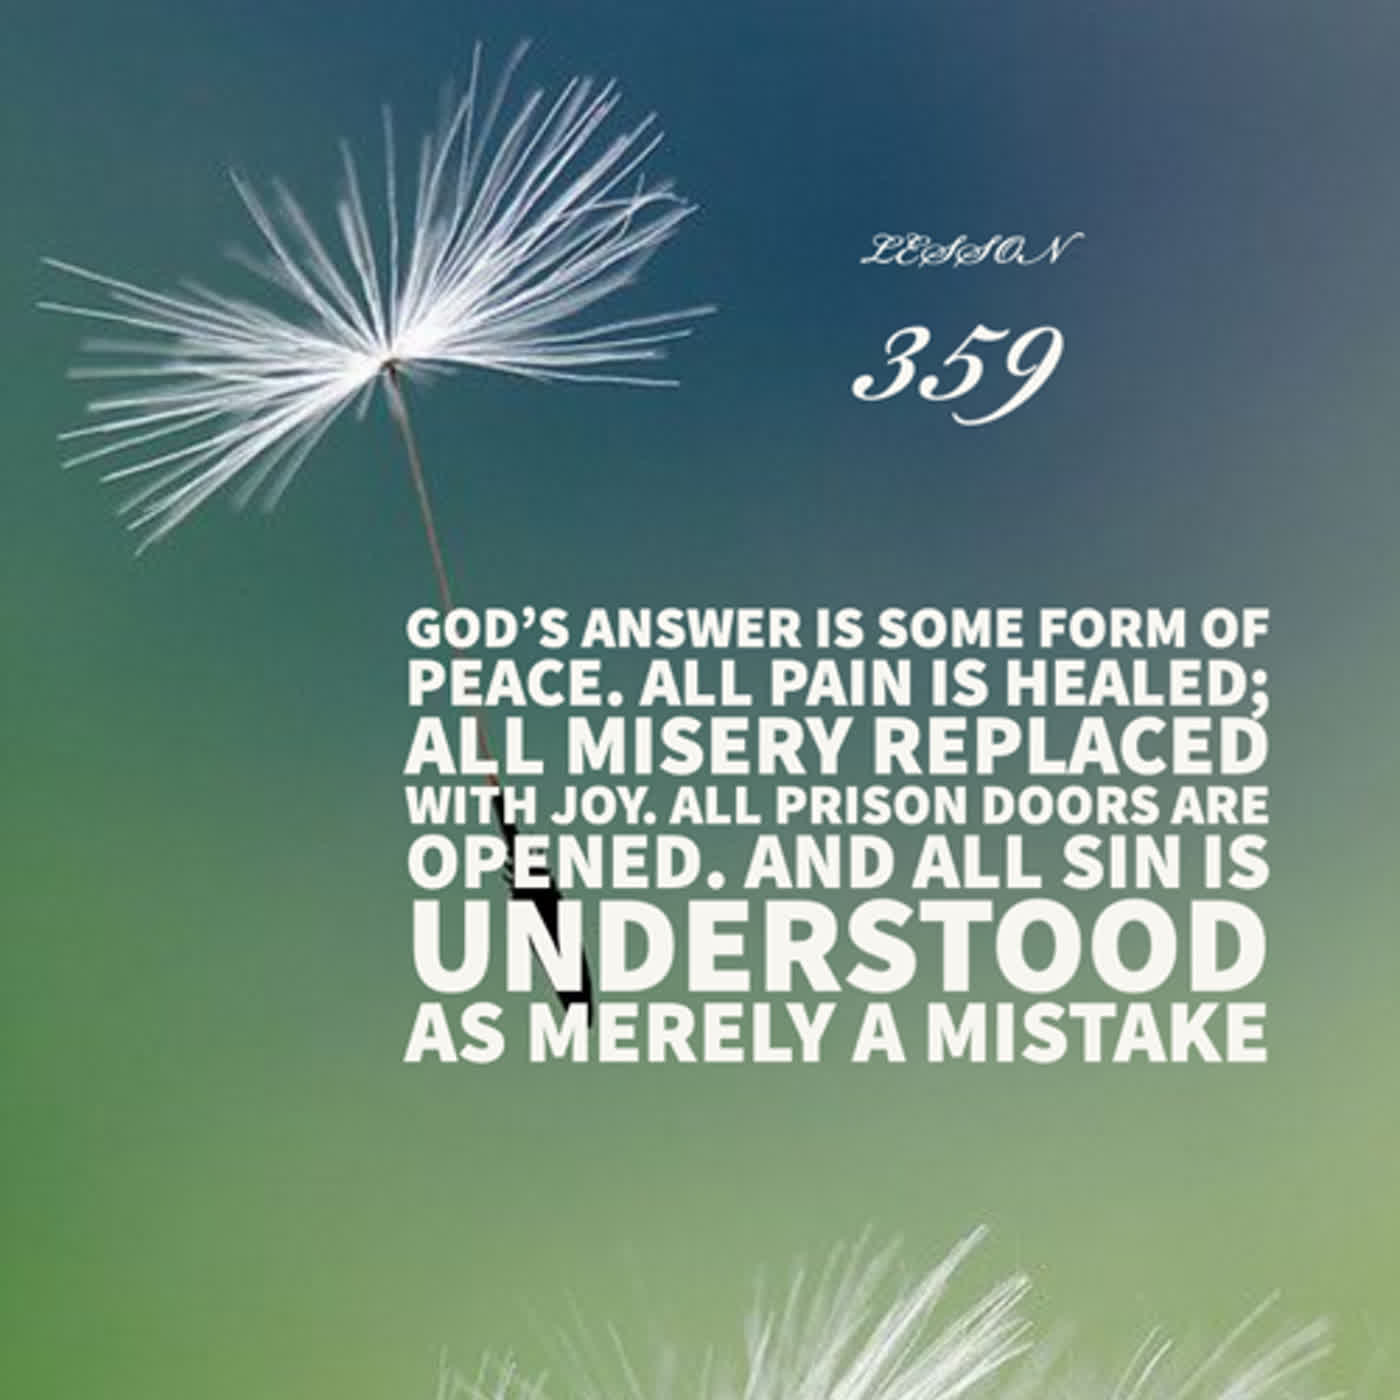 Lesson 359  God’s answer is some form of peace. All pain is healed; all misery replaced with joy. All prison doors are opened. And all sin is understood as merely a mistake